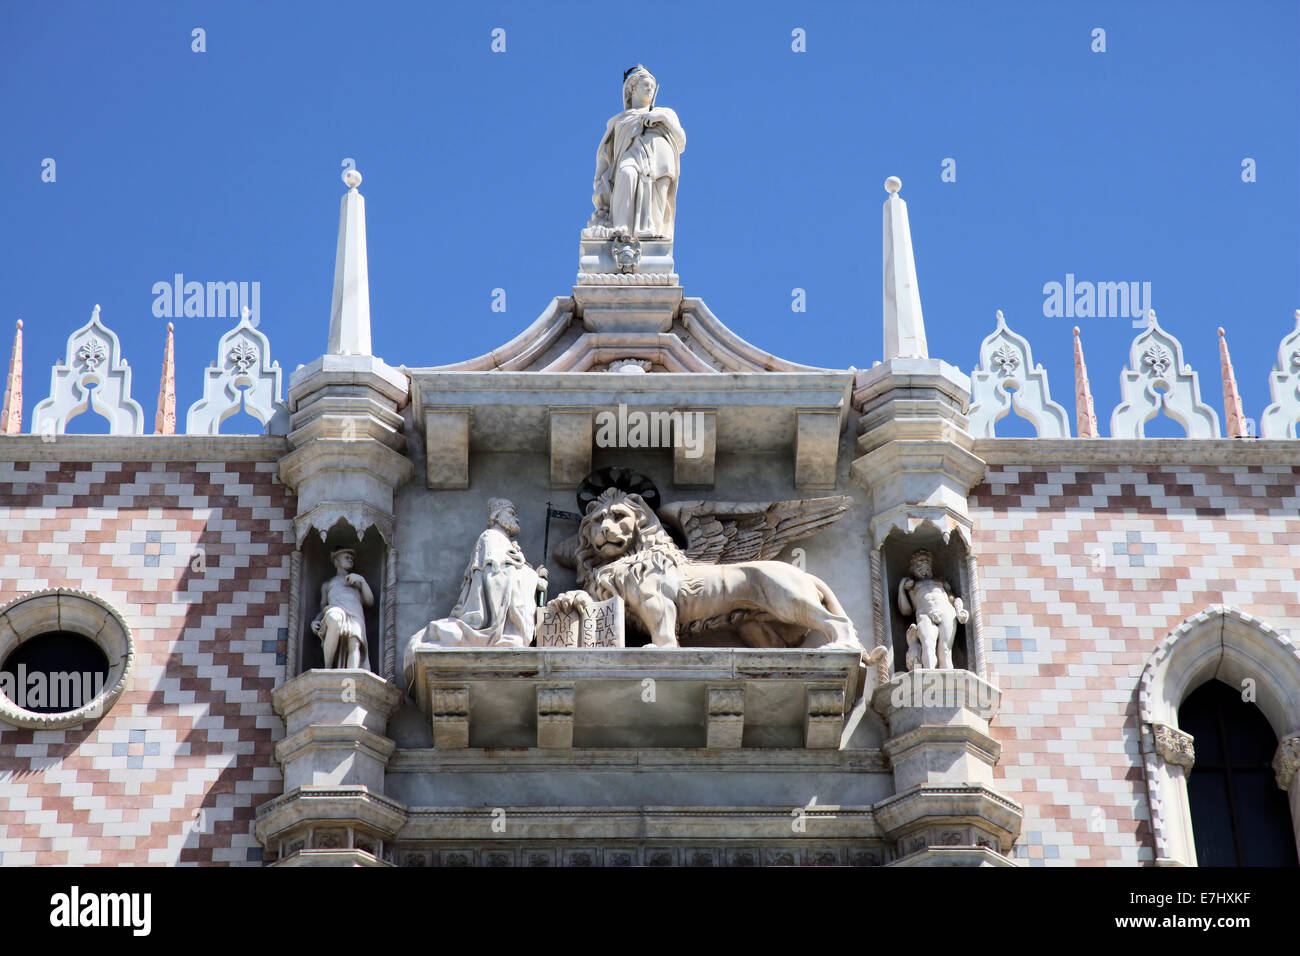 TOP AREA OF ITALIEN BUILDING SHOWING LION Stock Photo